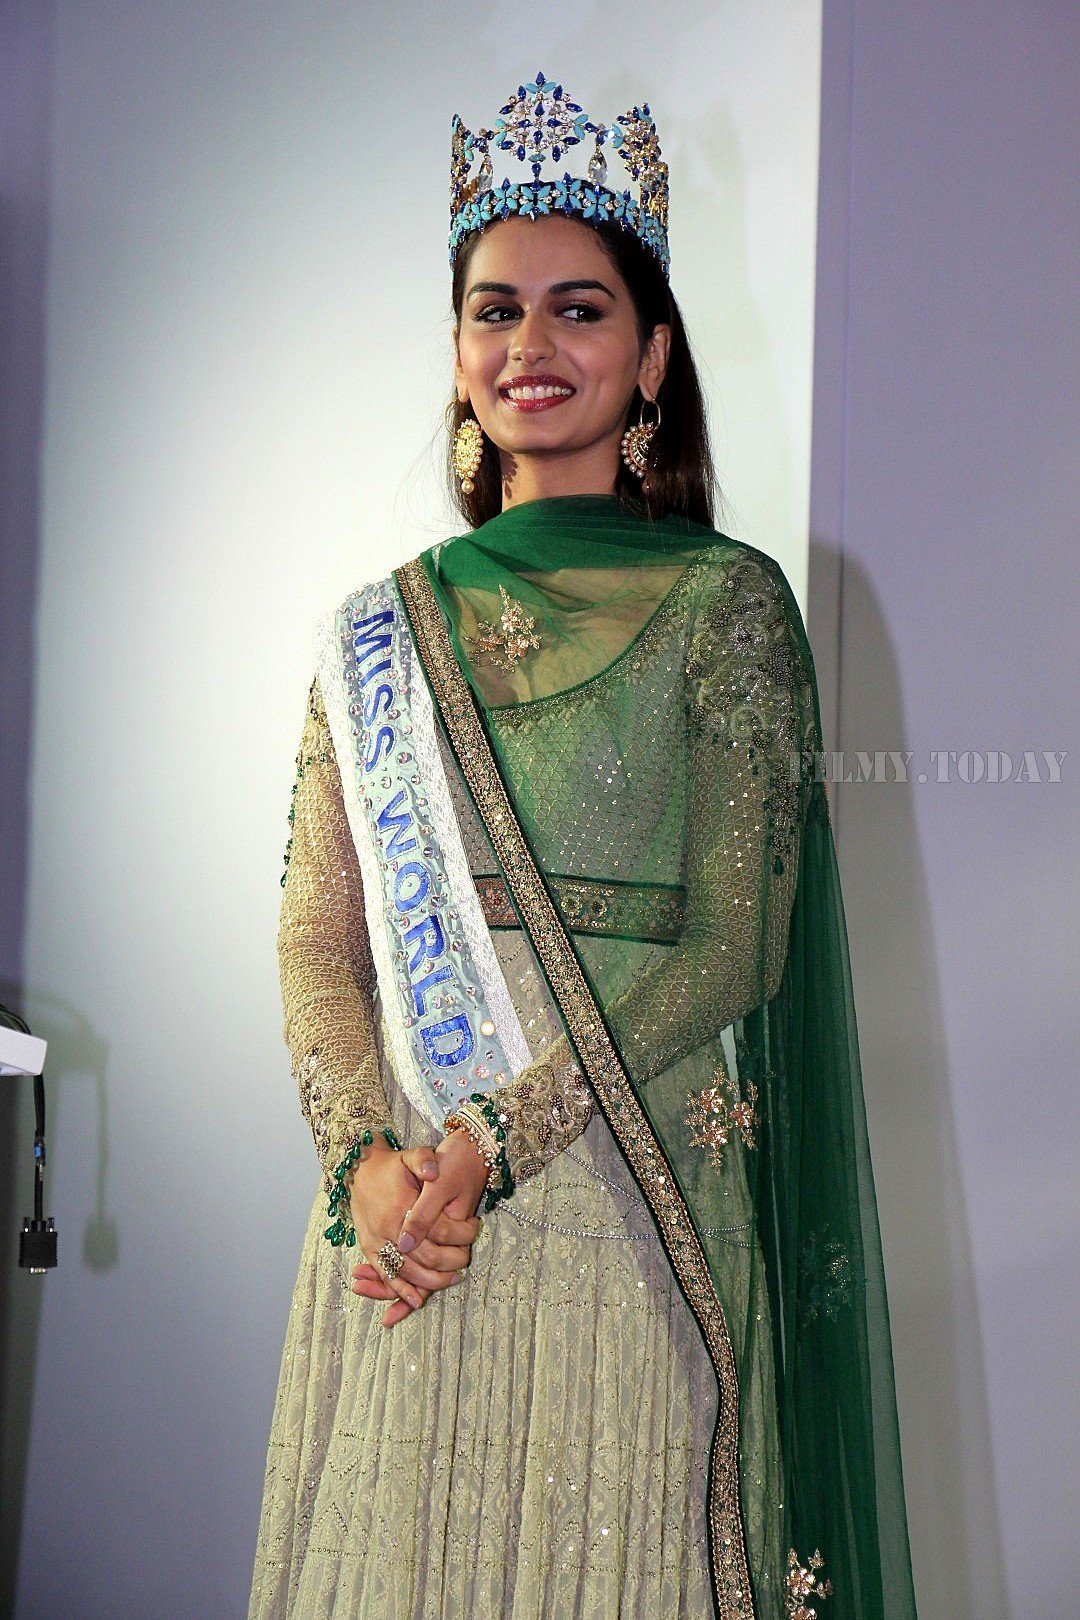 Photos: Manushi Chillar At The Press Conference For Winning Miss World Title | Picture 1547404